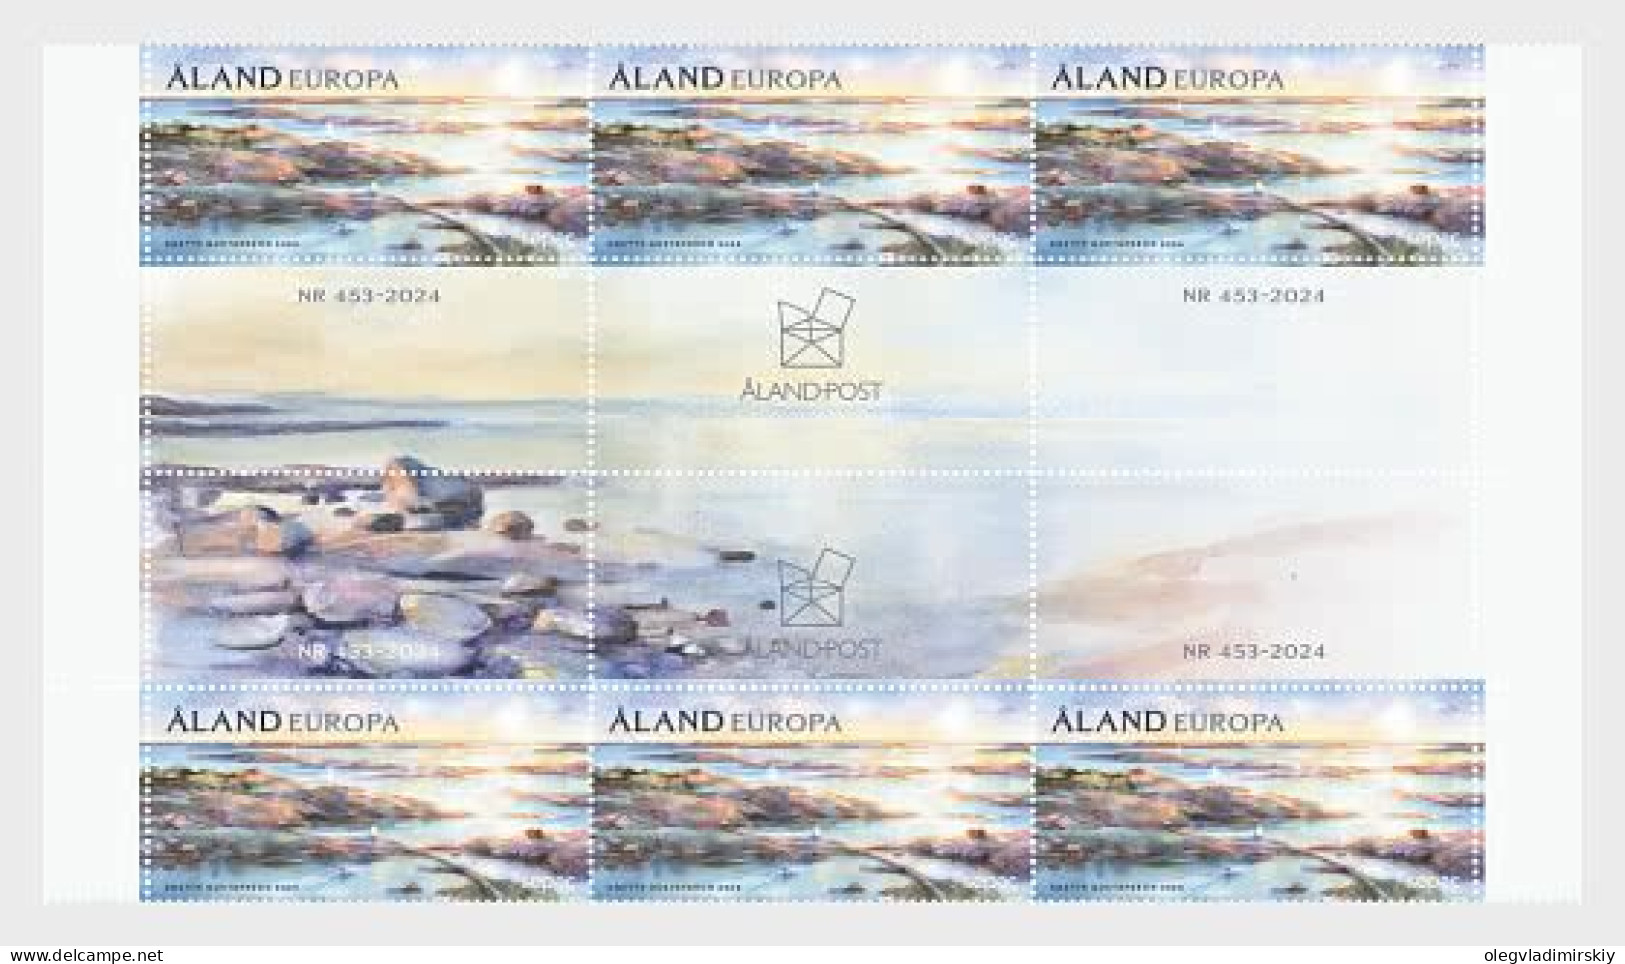 Aland Islalnds Åland Finland 2024 SEPAC Beautiful Aland Block Of 6 Stamps And All Types Labels MNH - Aland